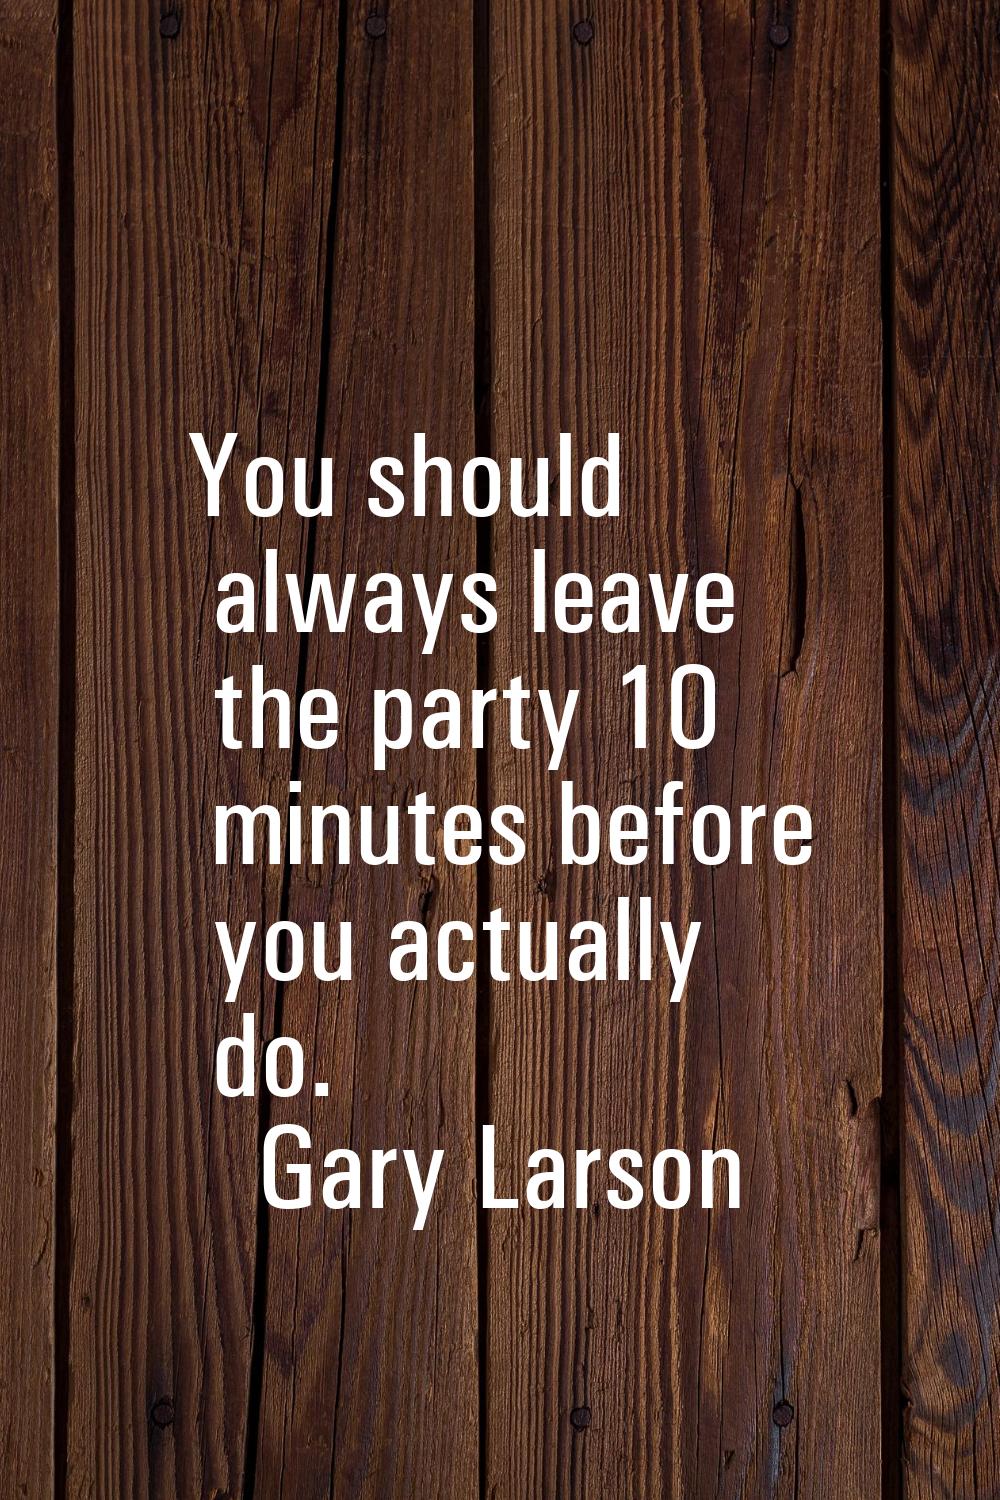 You should always leave the party 10 minutes before you actually do.